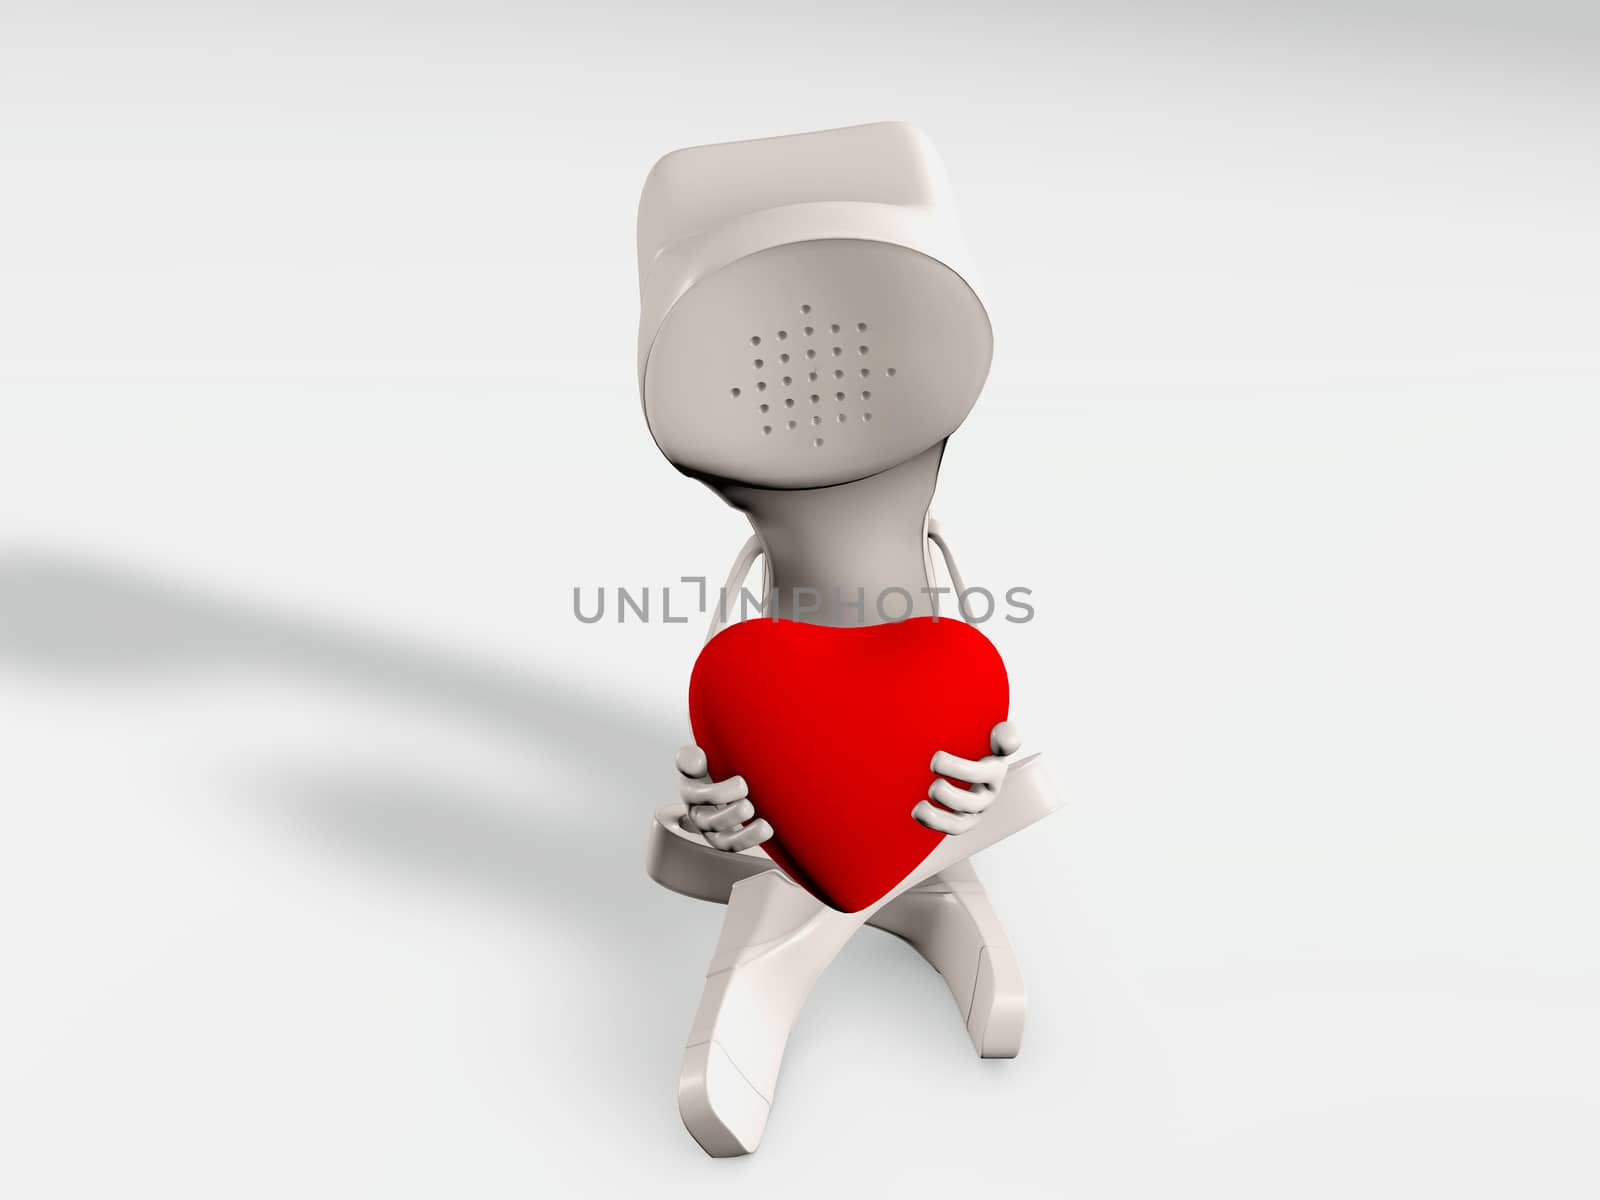 Telephone character being in love sitting with a heart in hands 3d rendering by F1b0nacci